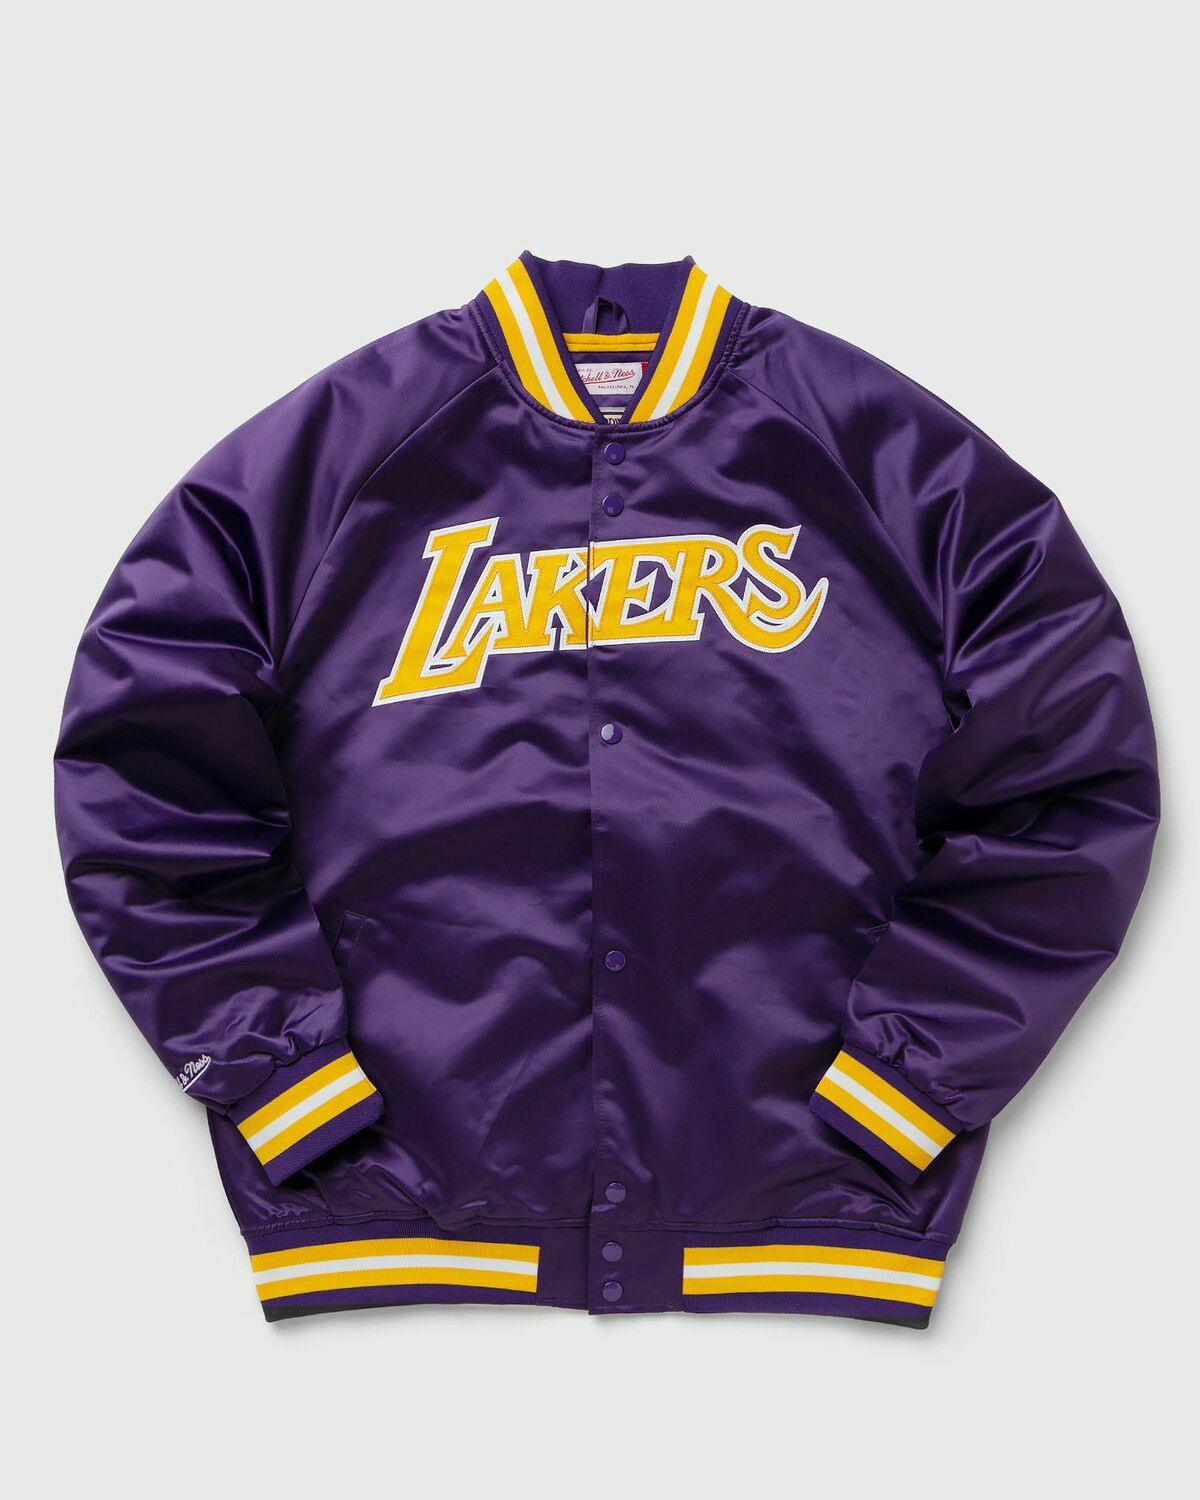 Los Angeles Clippers 1995-96 Mitchell & Ness Authentic Warm Up Jacket